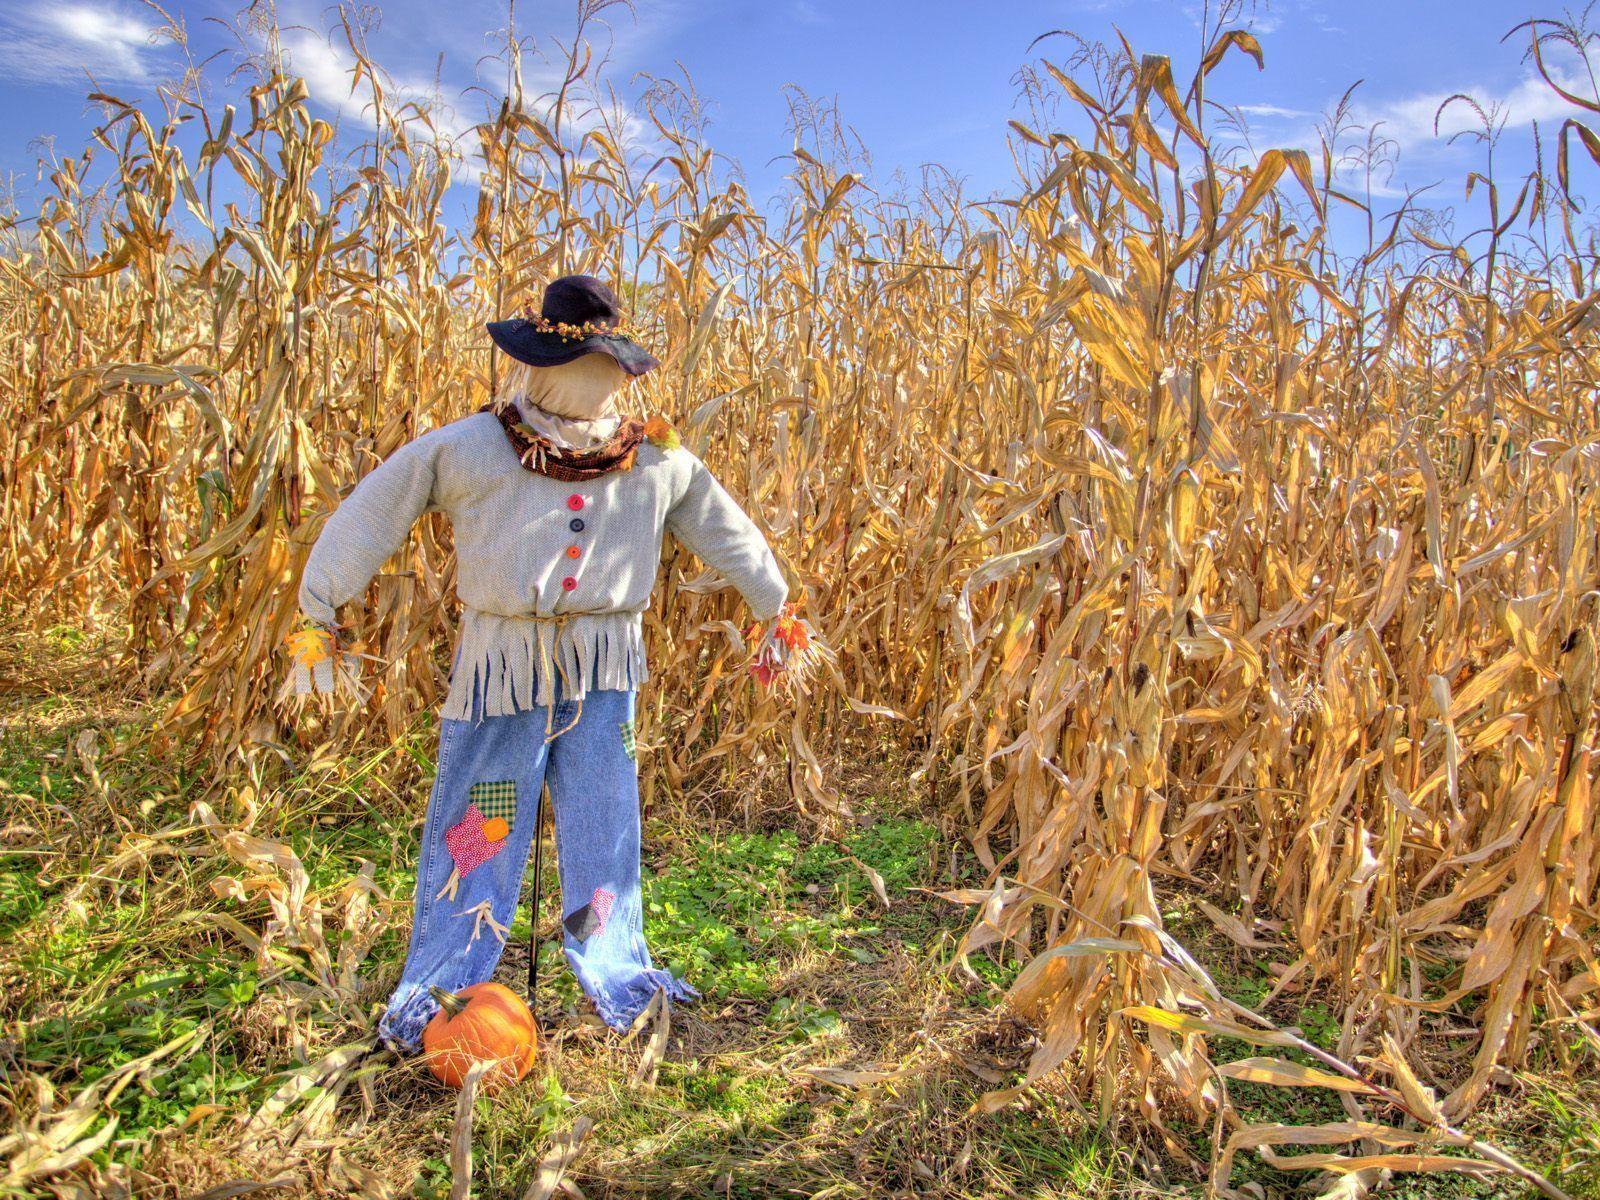 Scarecrow Wallpaper, Free Scarecrow In Field Wallpaper